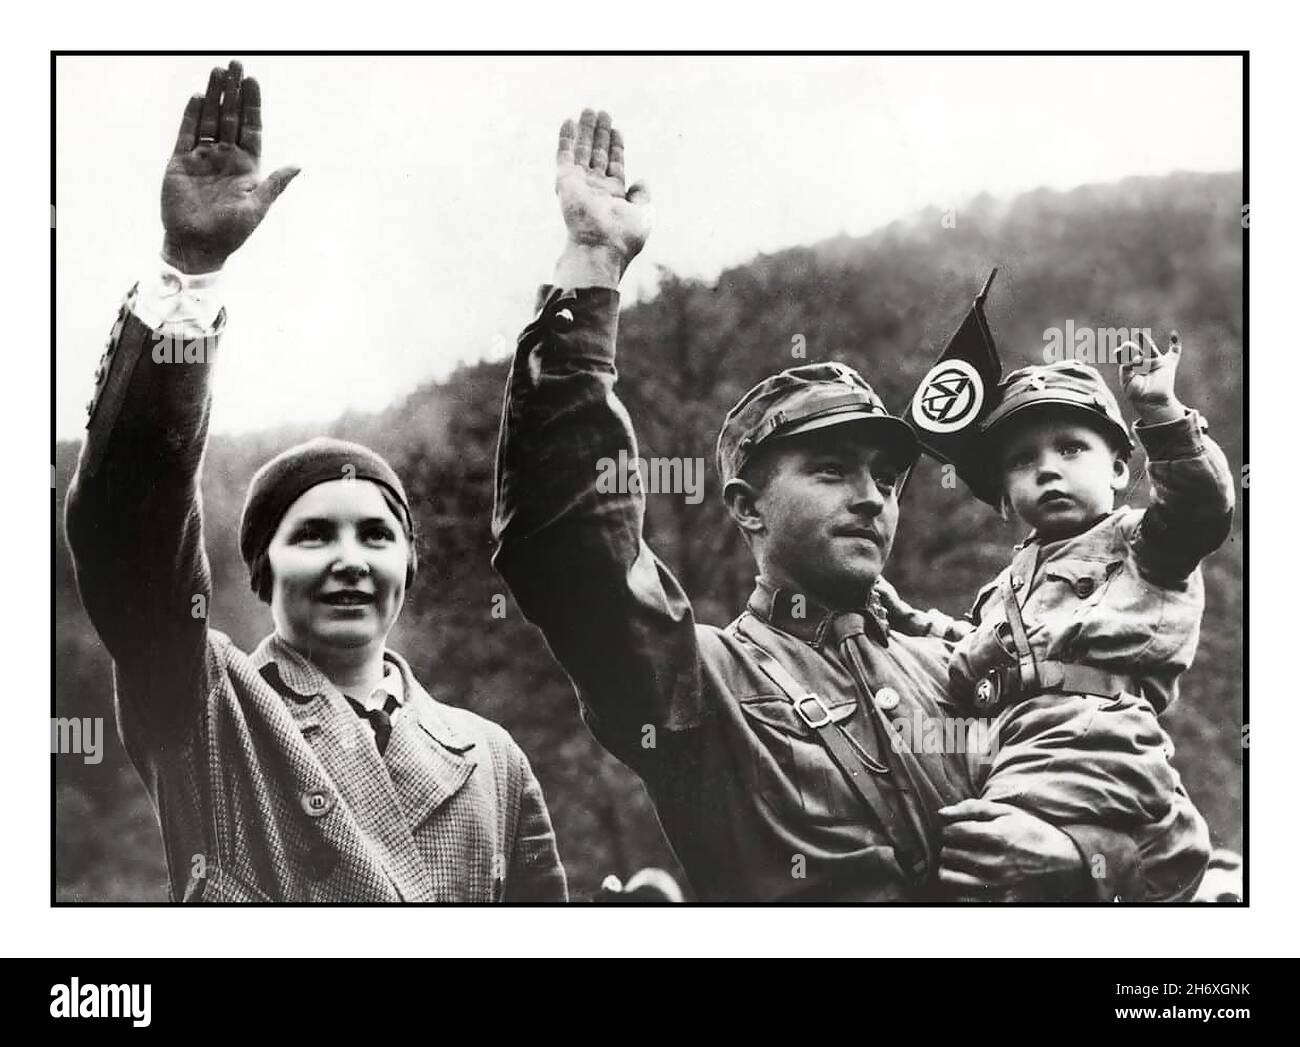 SA Sturmabteilung 1930s Archive Nazi German family of three giving the Heil Hitler salute, with the father wearing the uniform of the SA Sturmabteilung brown shirts paramilitary nazi wing. His son wearing similar infant uniform waving the flag pennant of the SA Sturmabteilung Nazi Germany. The considered ideal Aryan German Family of the 1930s Stock Photo